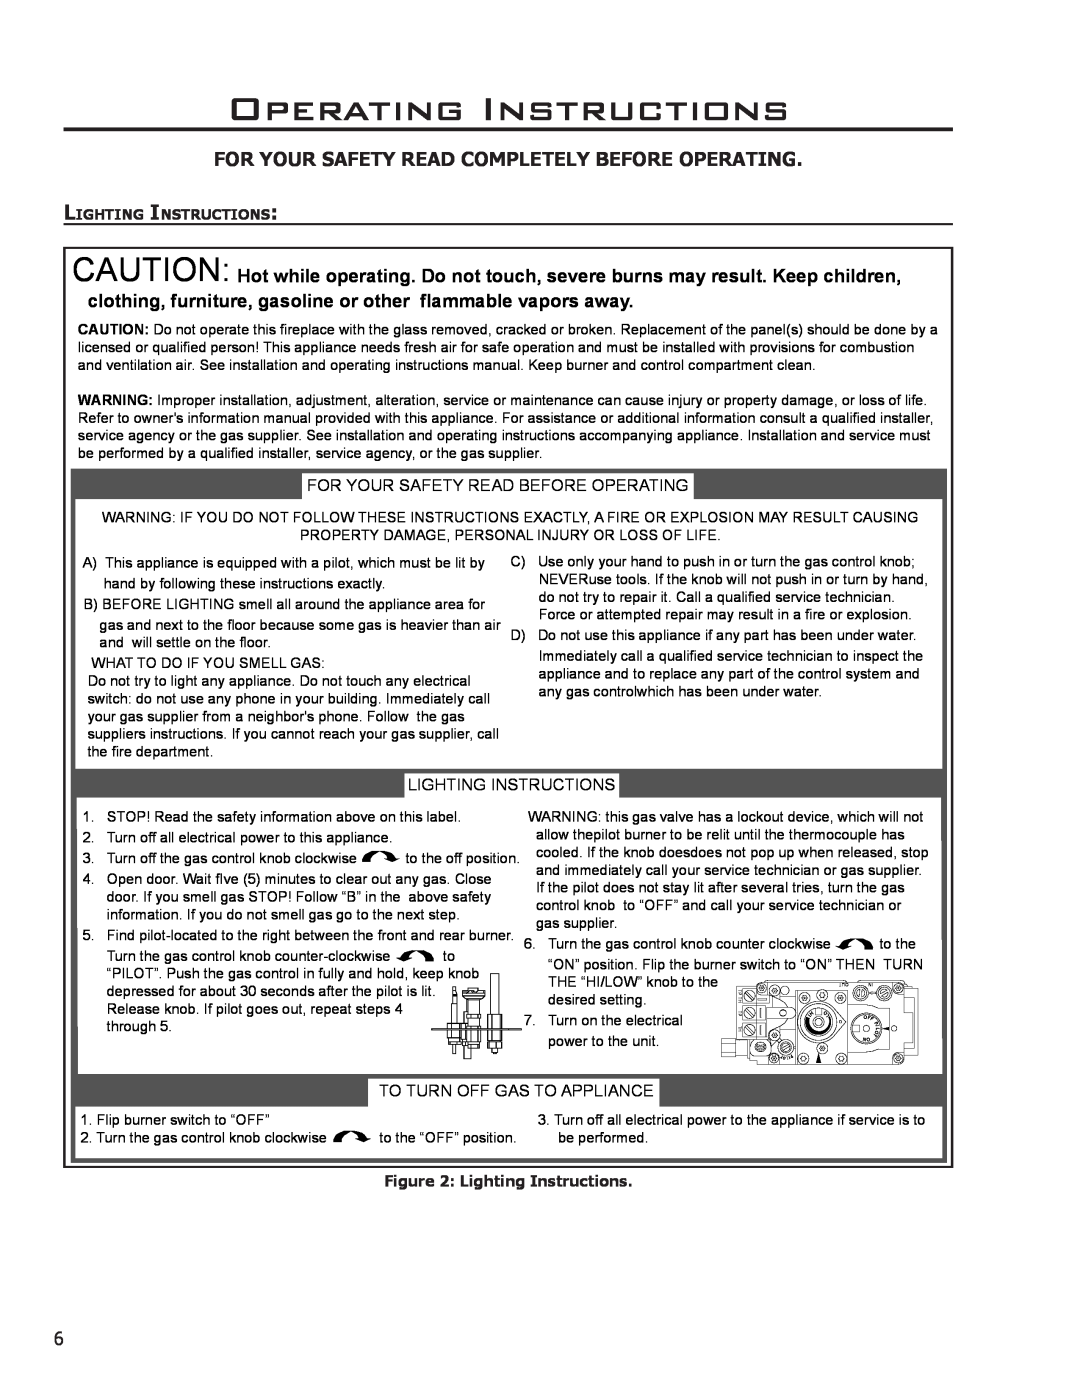 Enviro EG40-070 Operating Instructions, For Your Safety Read Completely Before Operating, Lighting Instructions 